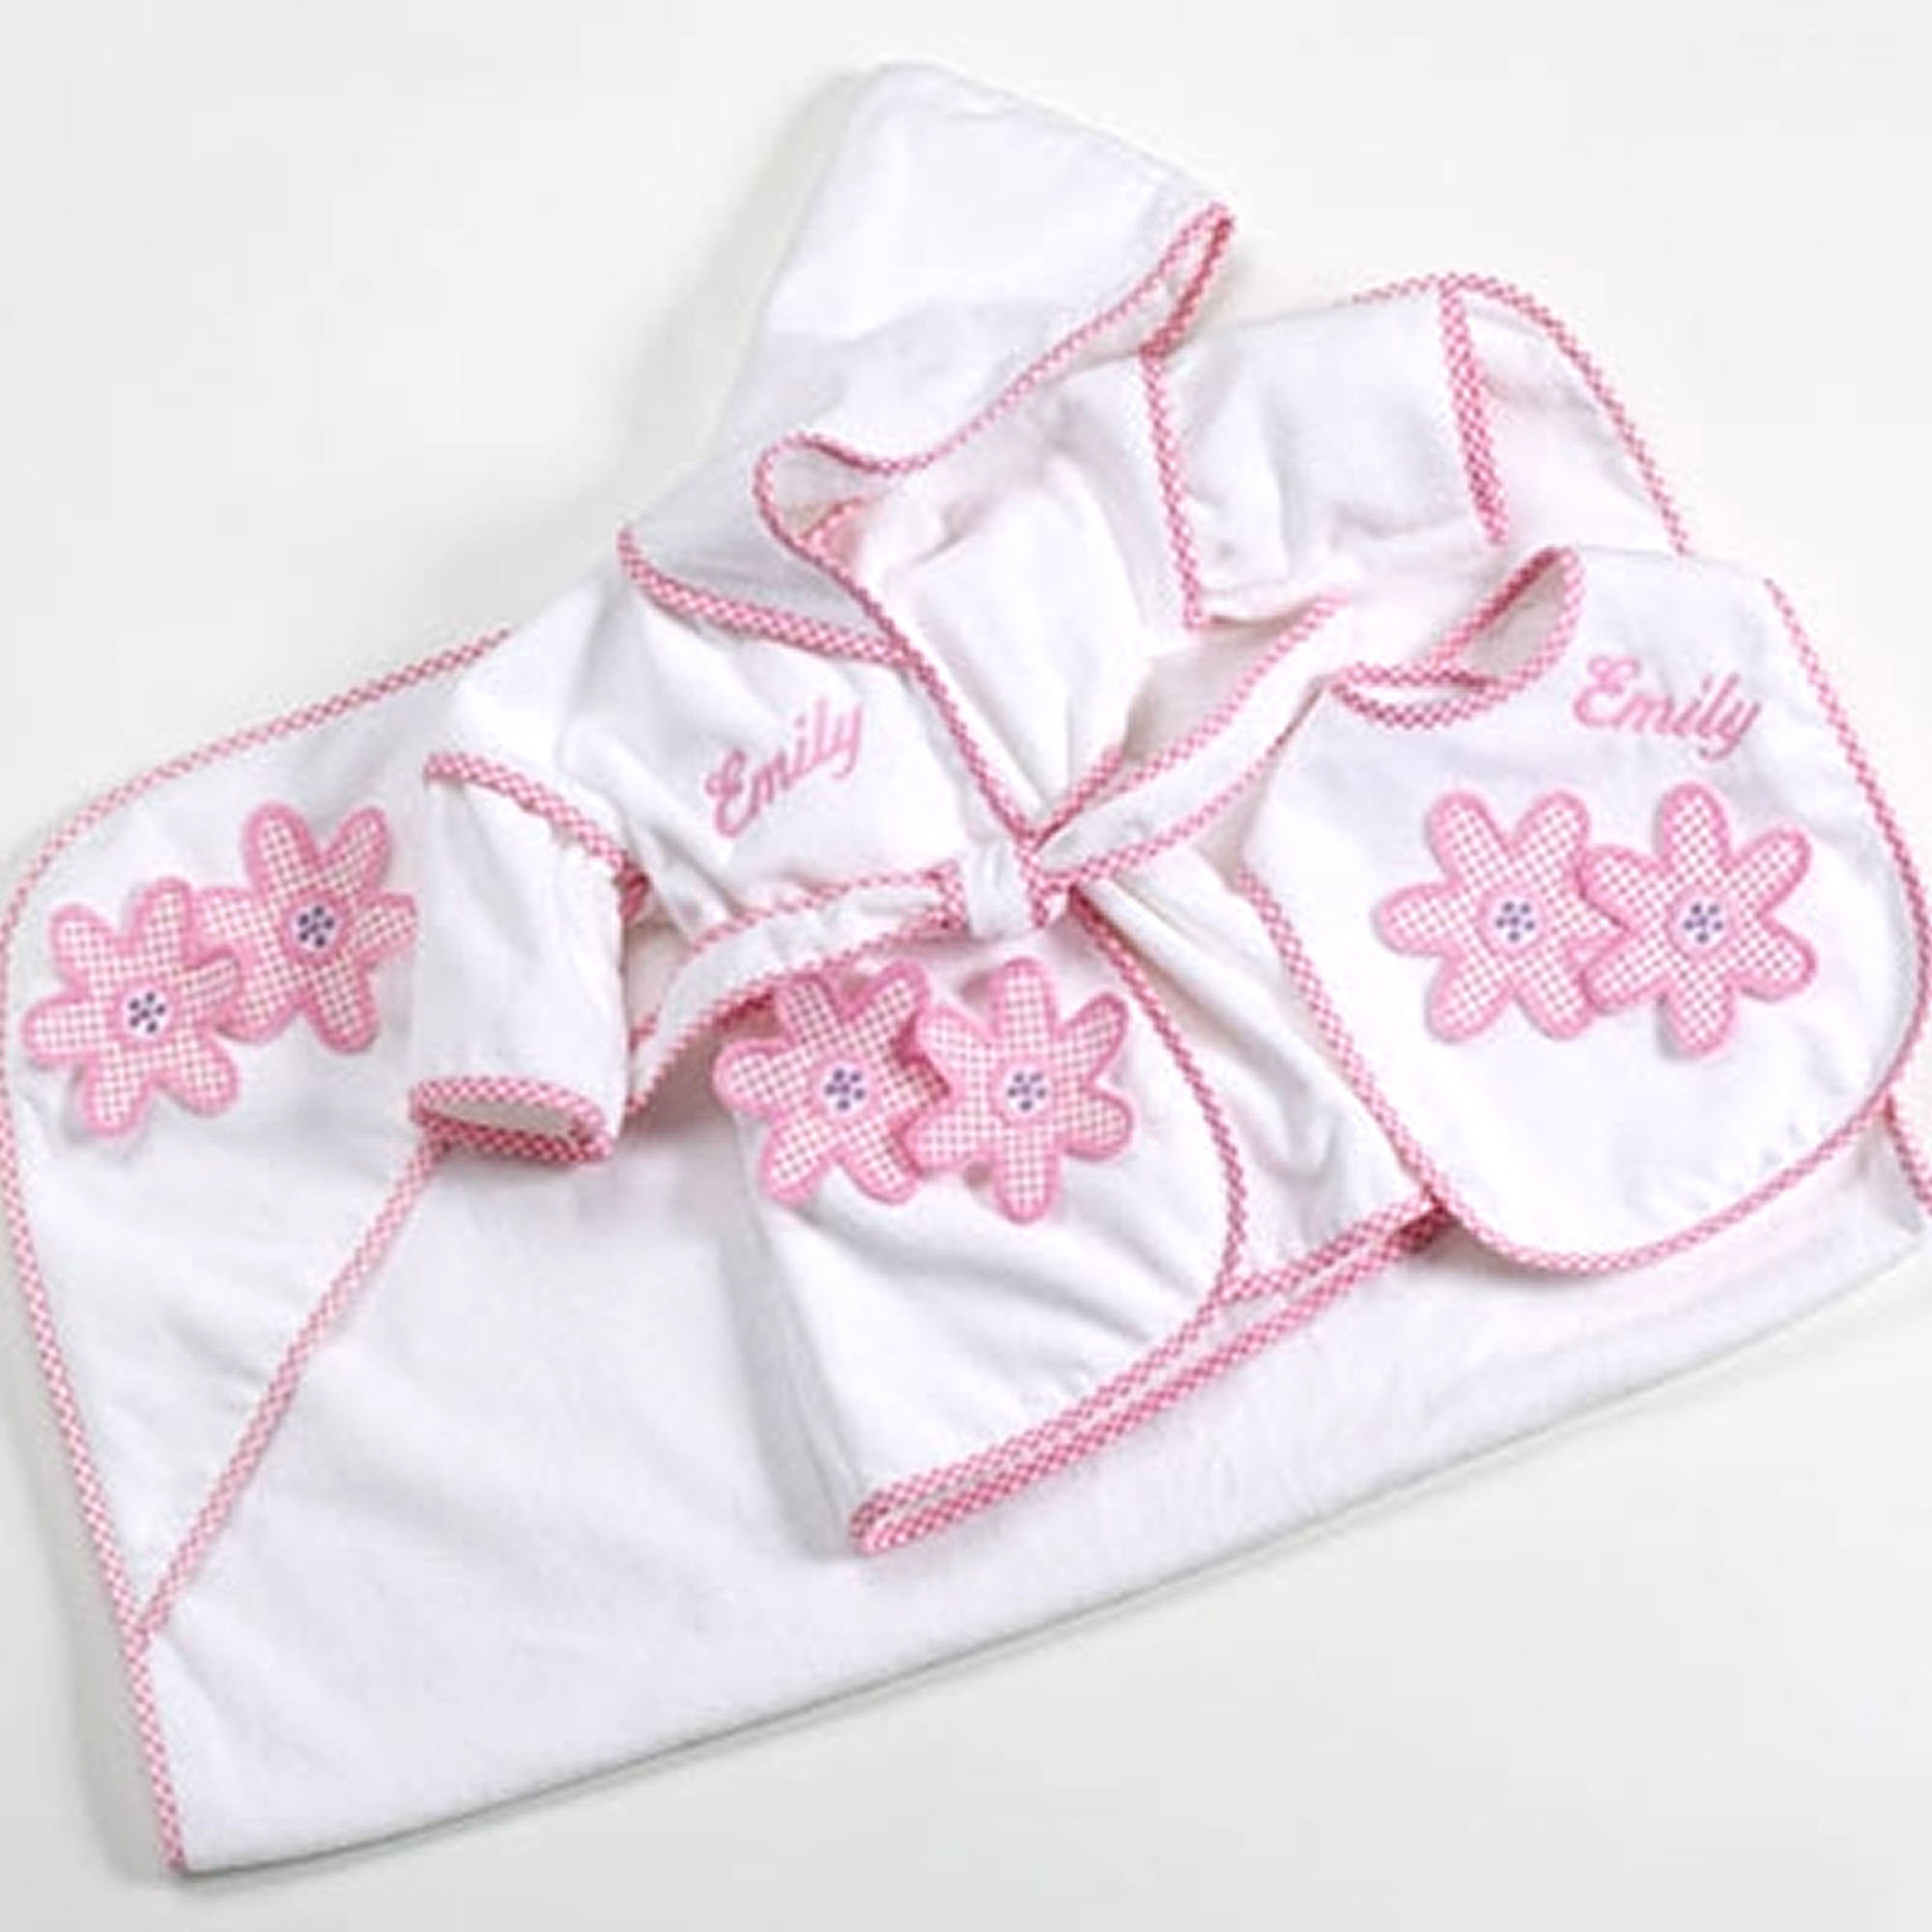 Unique Personalized Baby Gifts
 Baby Girl Gift Set Baseball